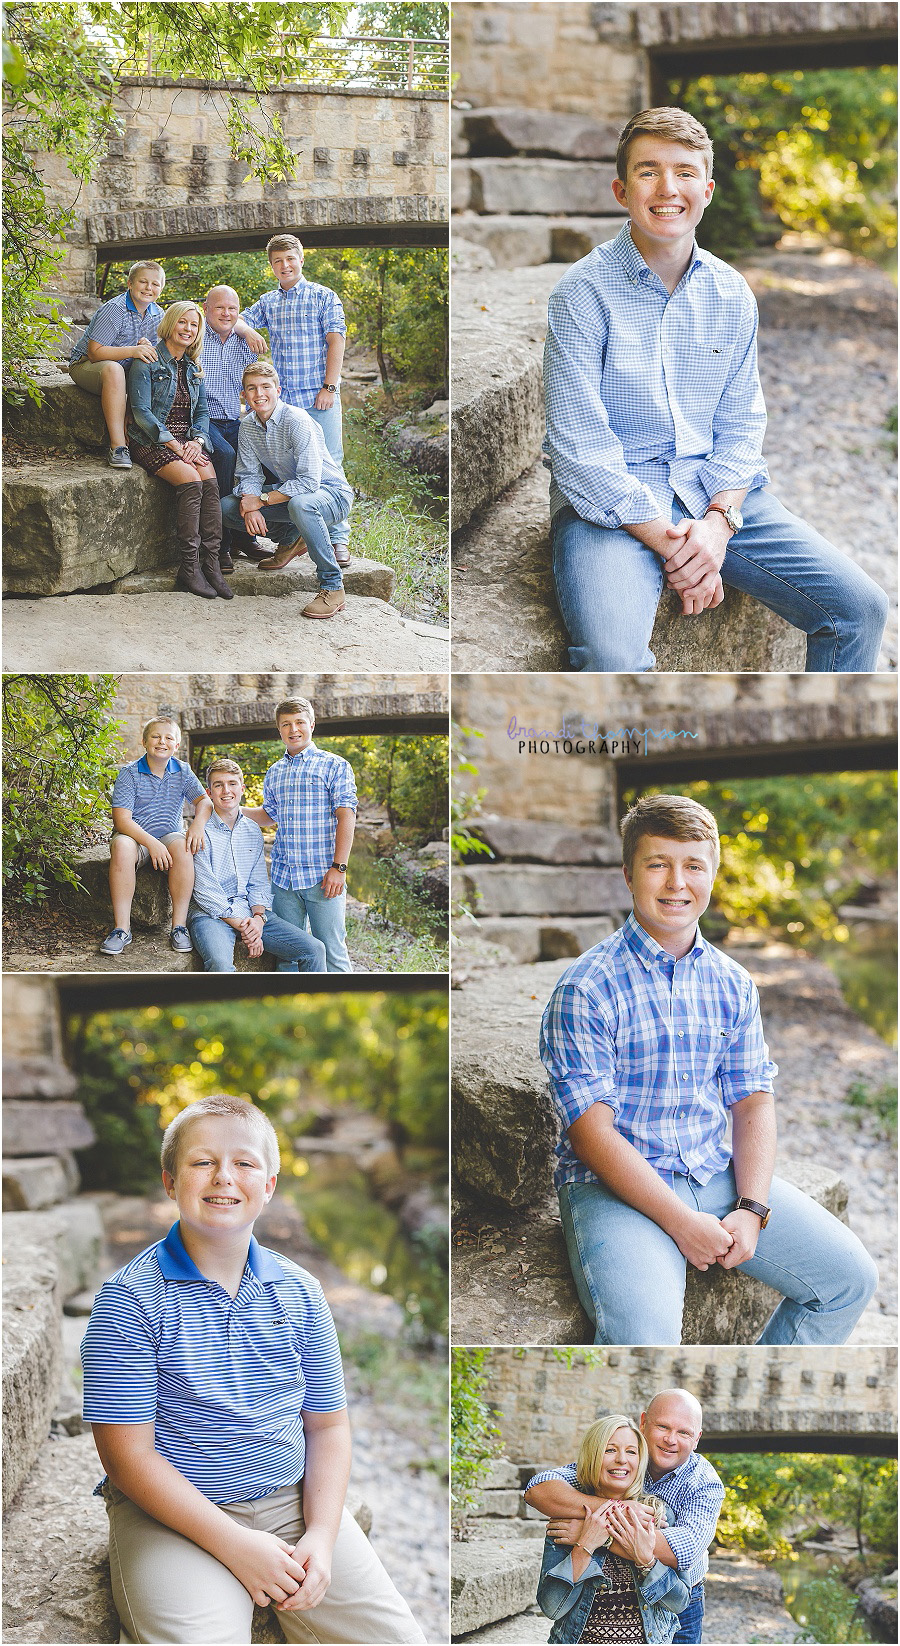 plano family photography at arbor hills nature preserve in Plano